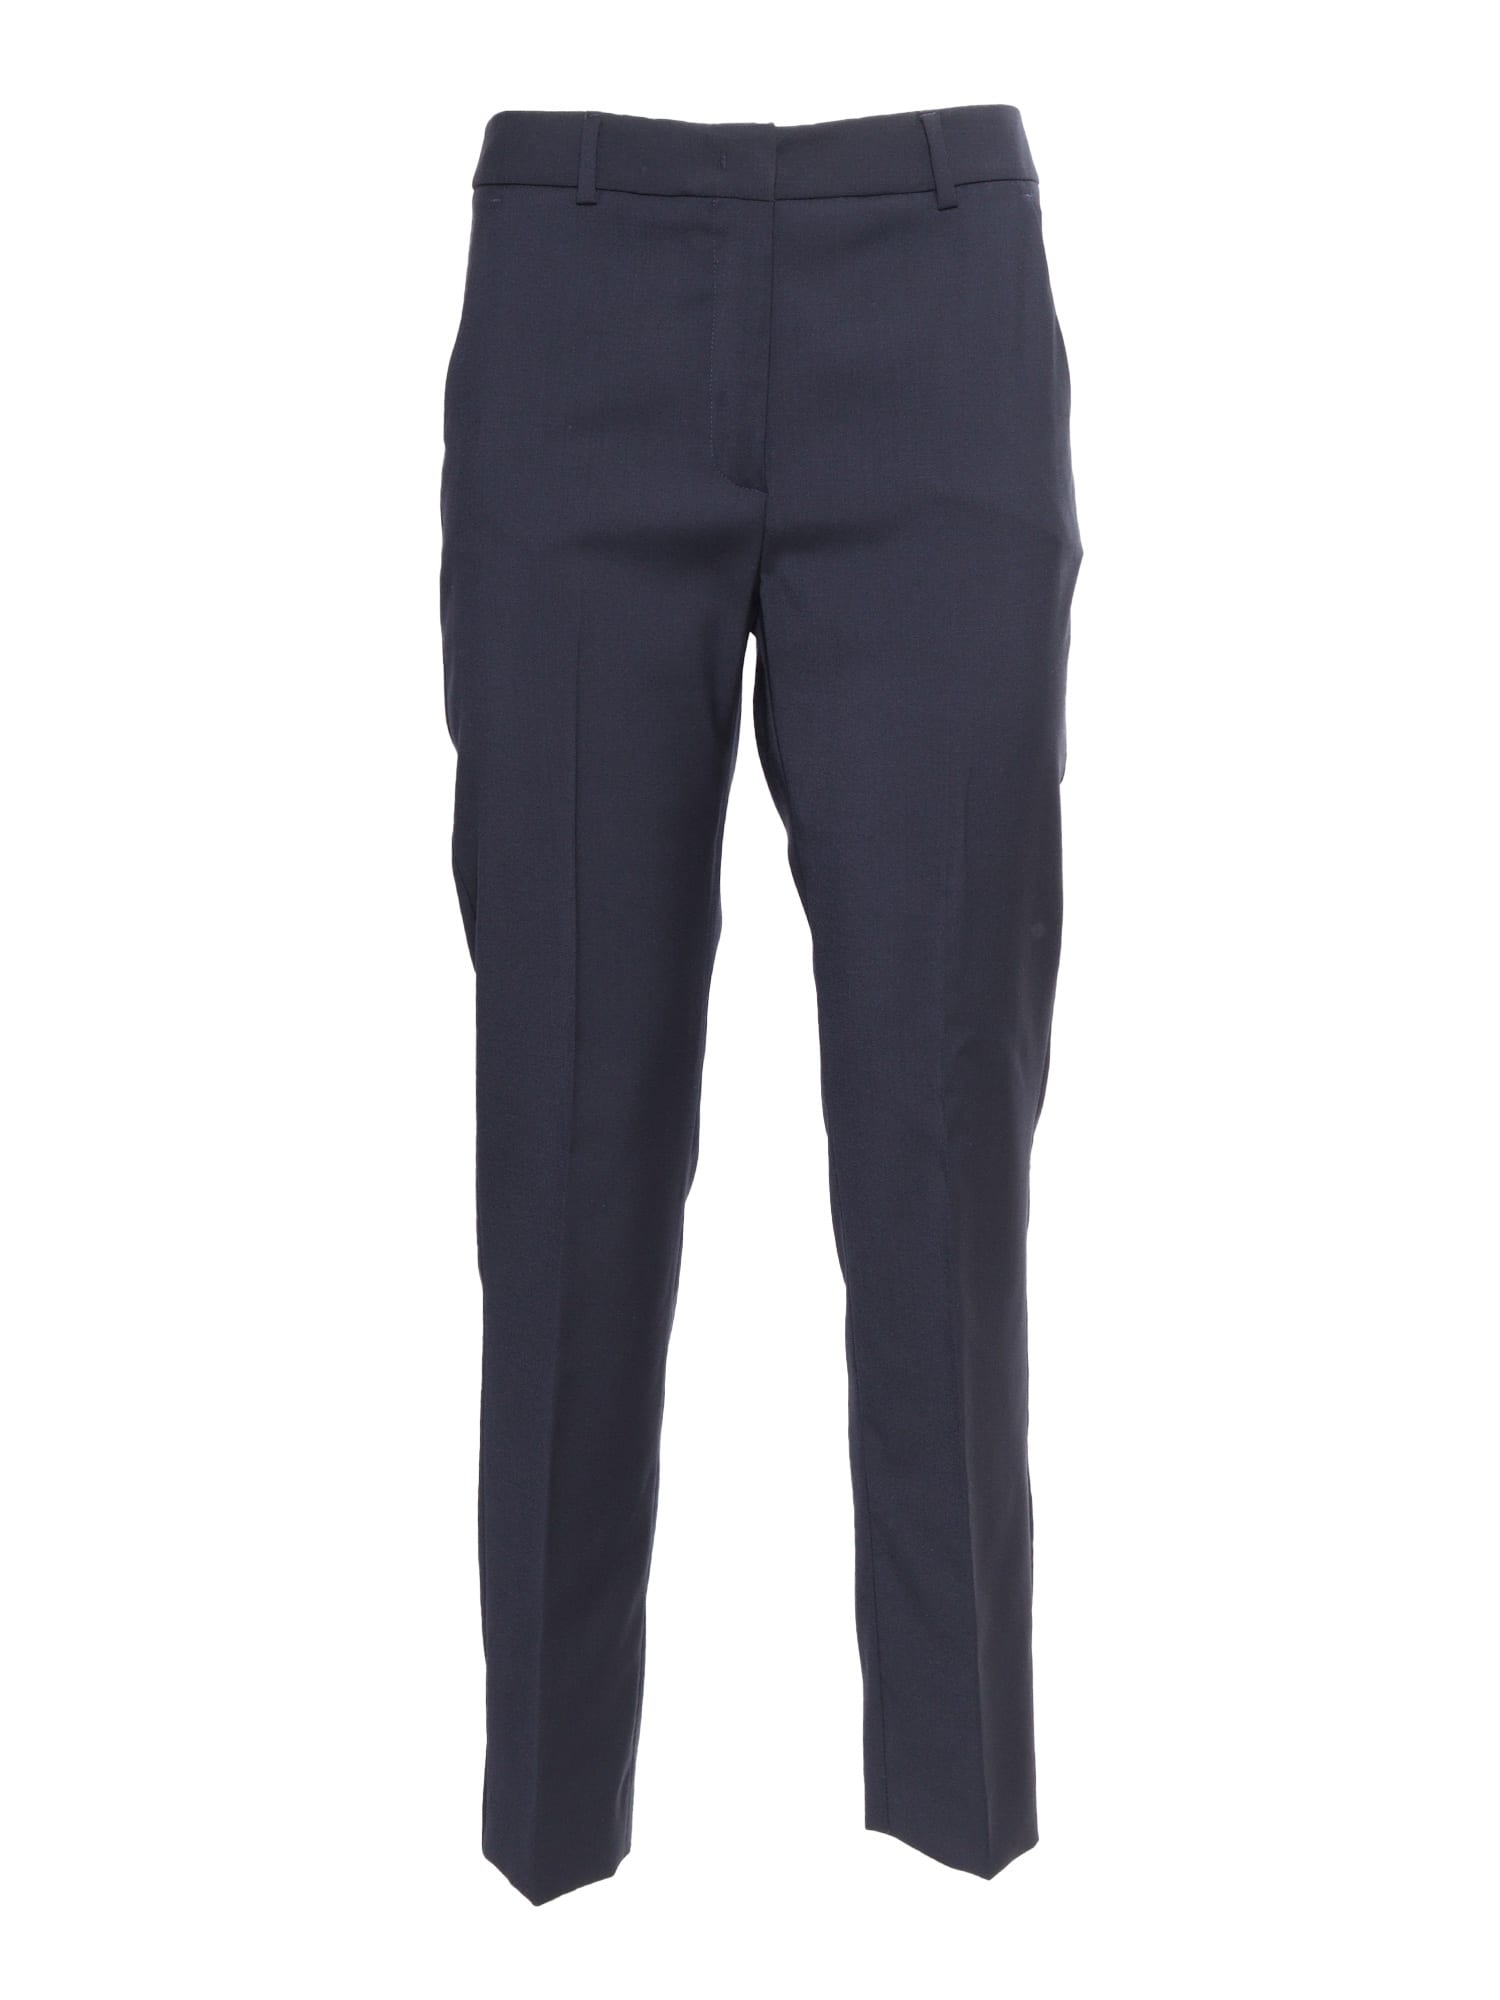 Canon Dress Trousers